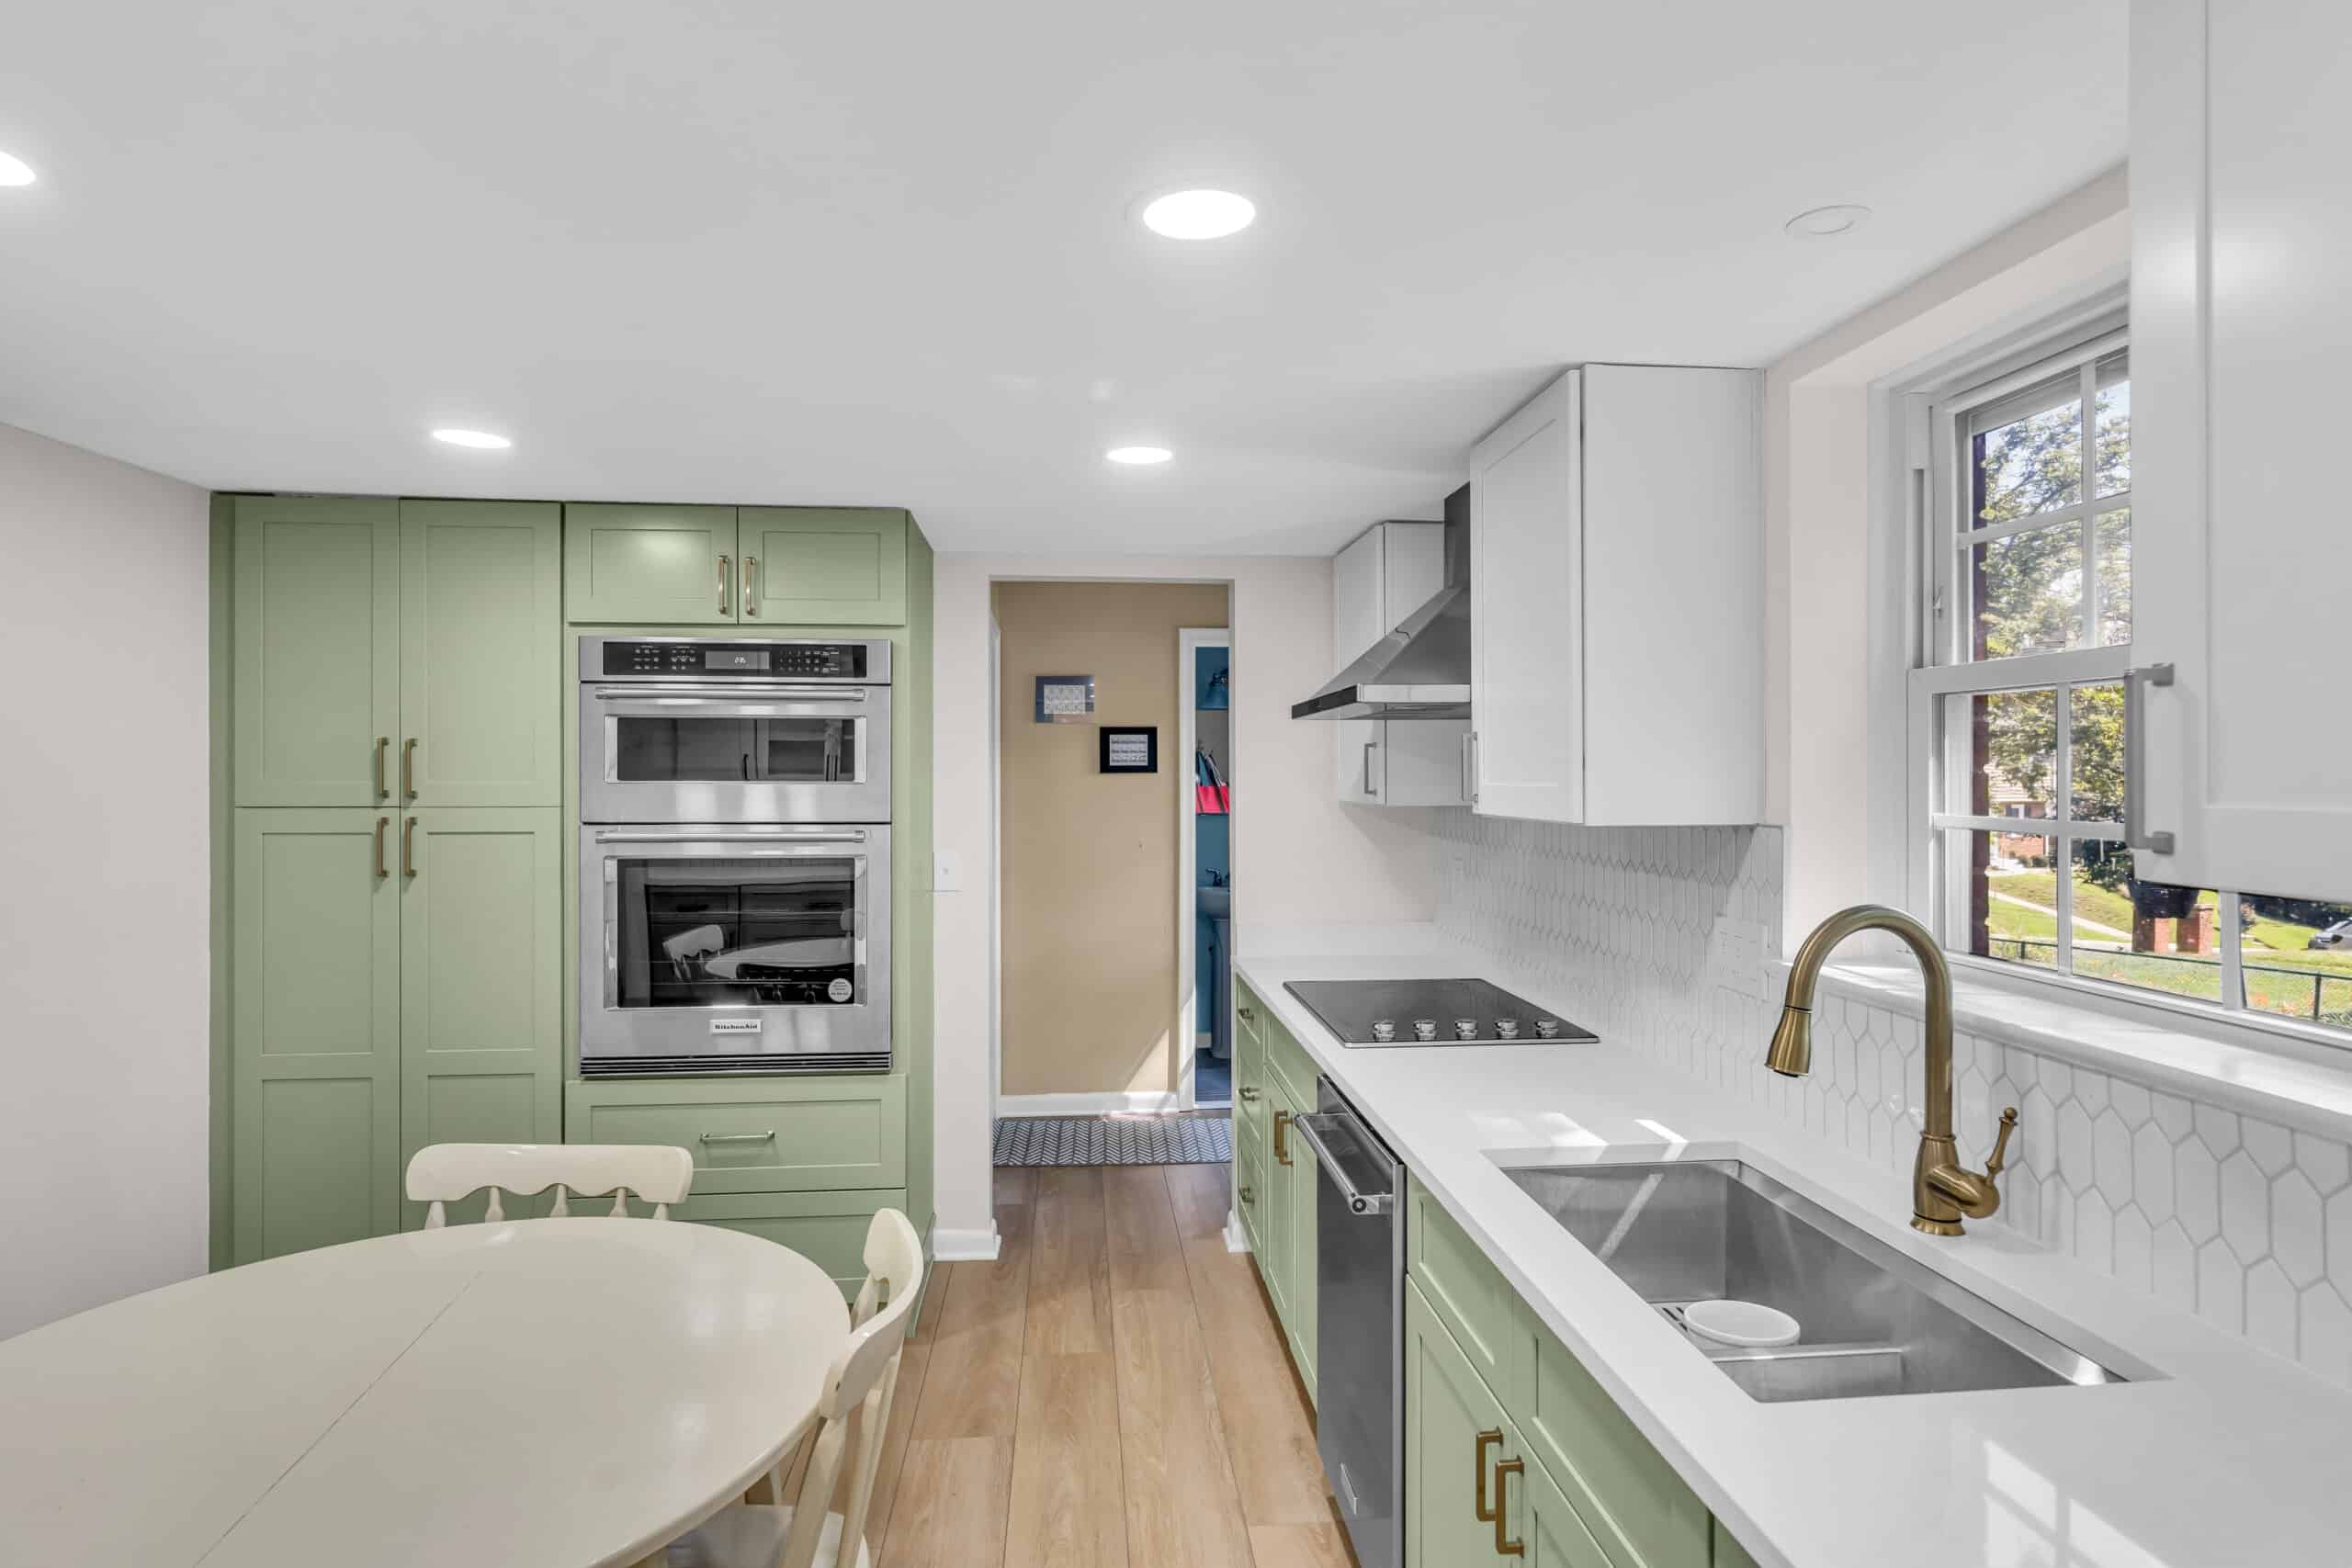 Deluxe white and green kitchen with shaker style cabinets